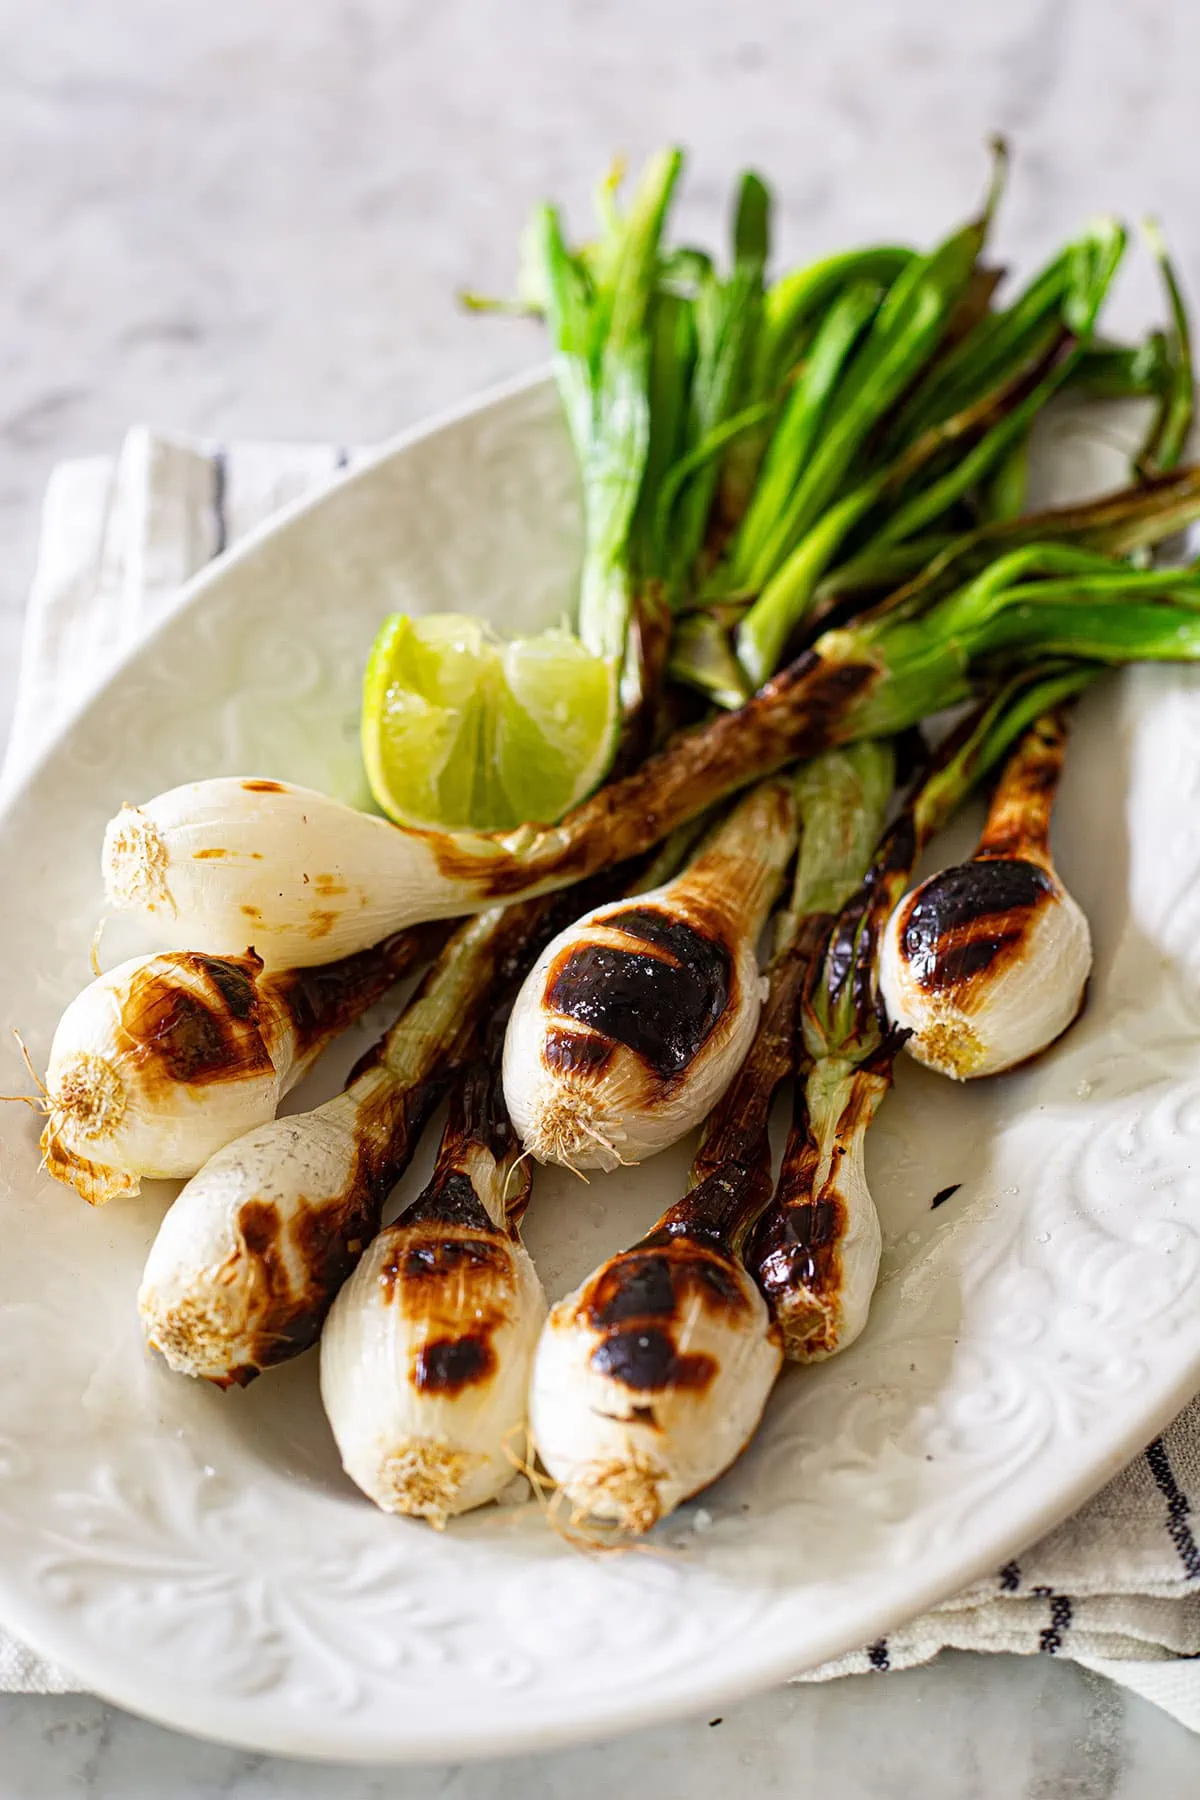 Grilled green onions on a plate.